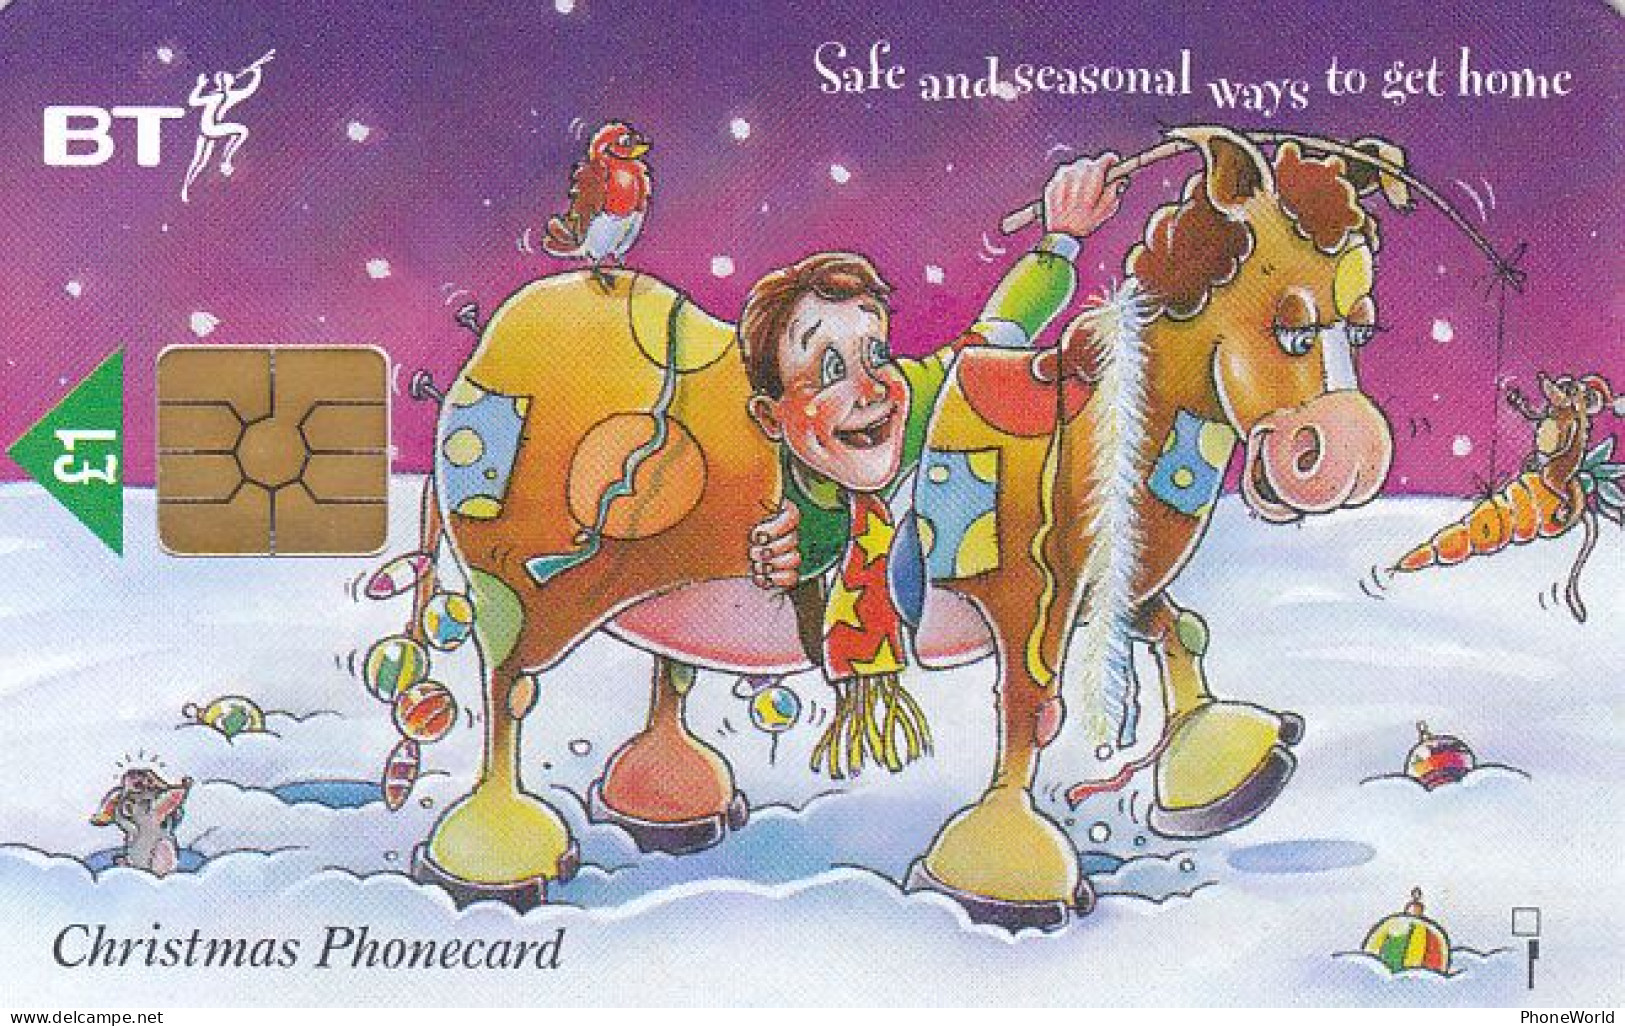 BT Folder With 6 Anti-drink Christmas Phonecards, Including Space Hopper And Panto Horse, Mint - BT Emissioni Tematiche Aerei Civili